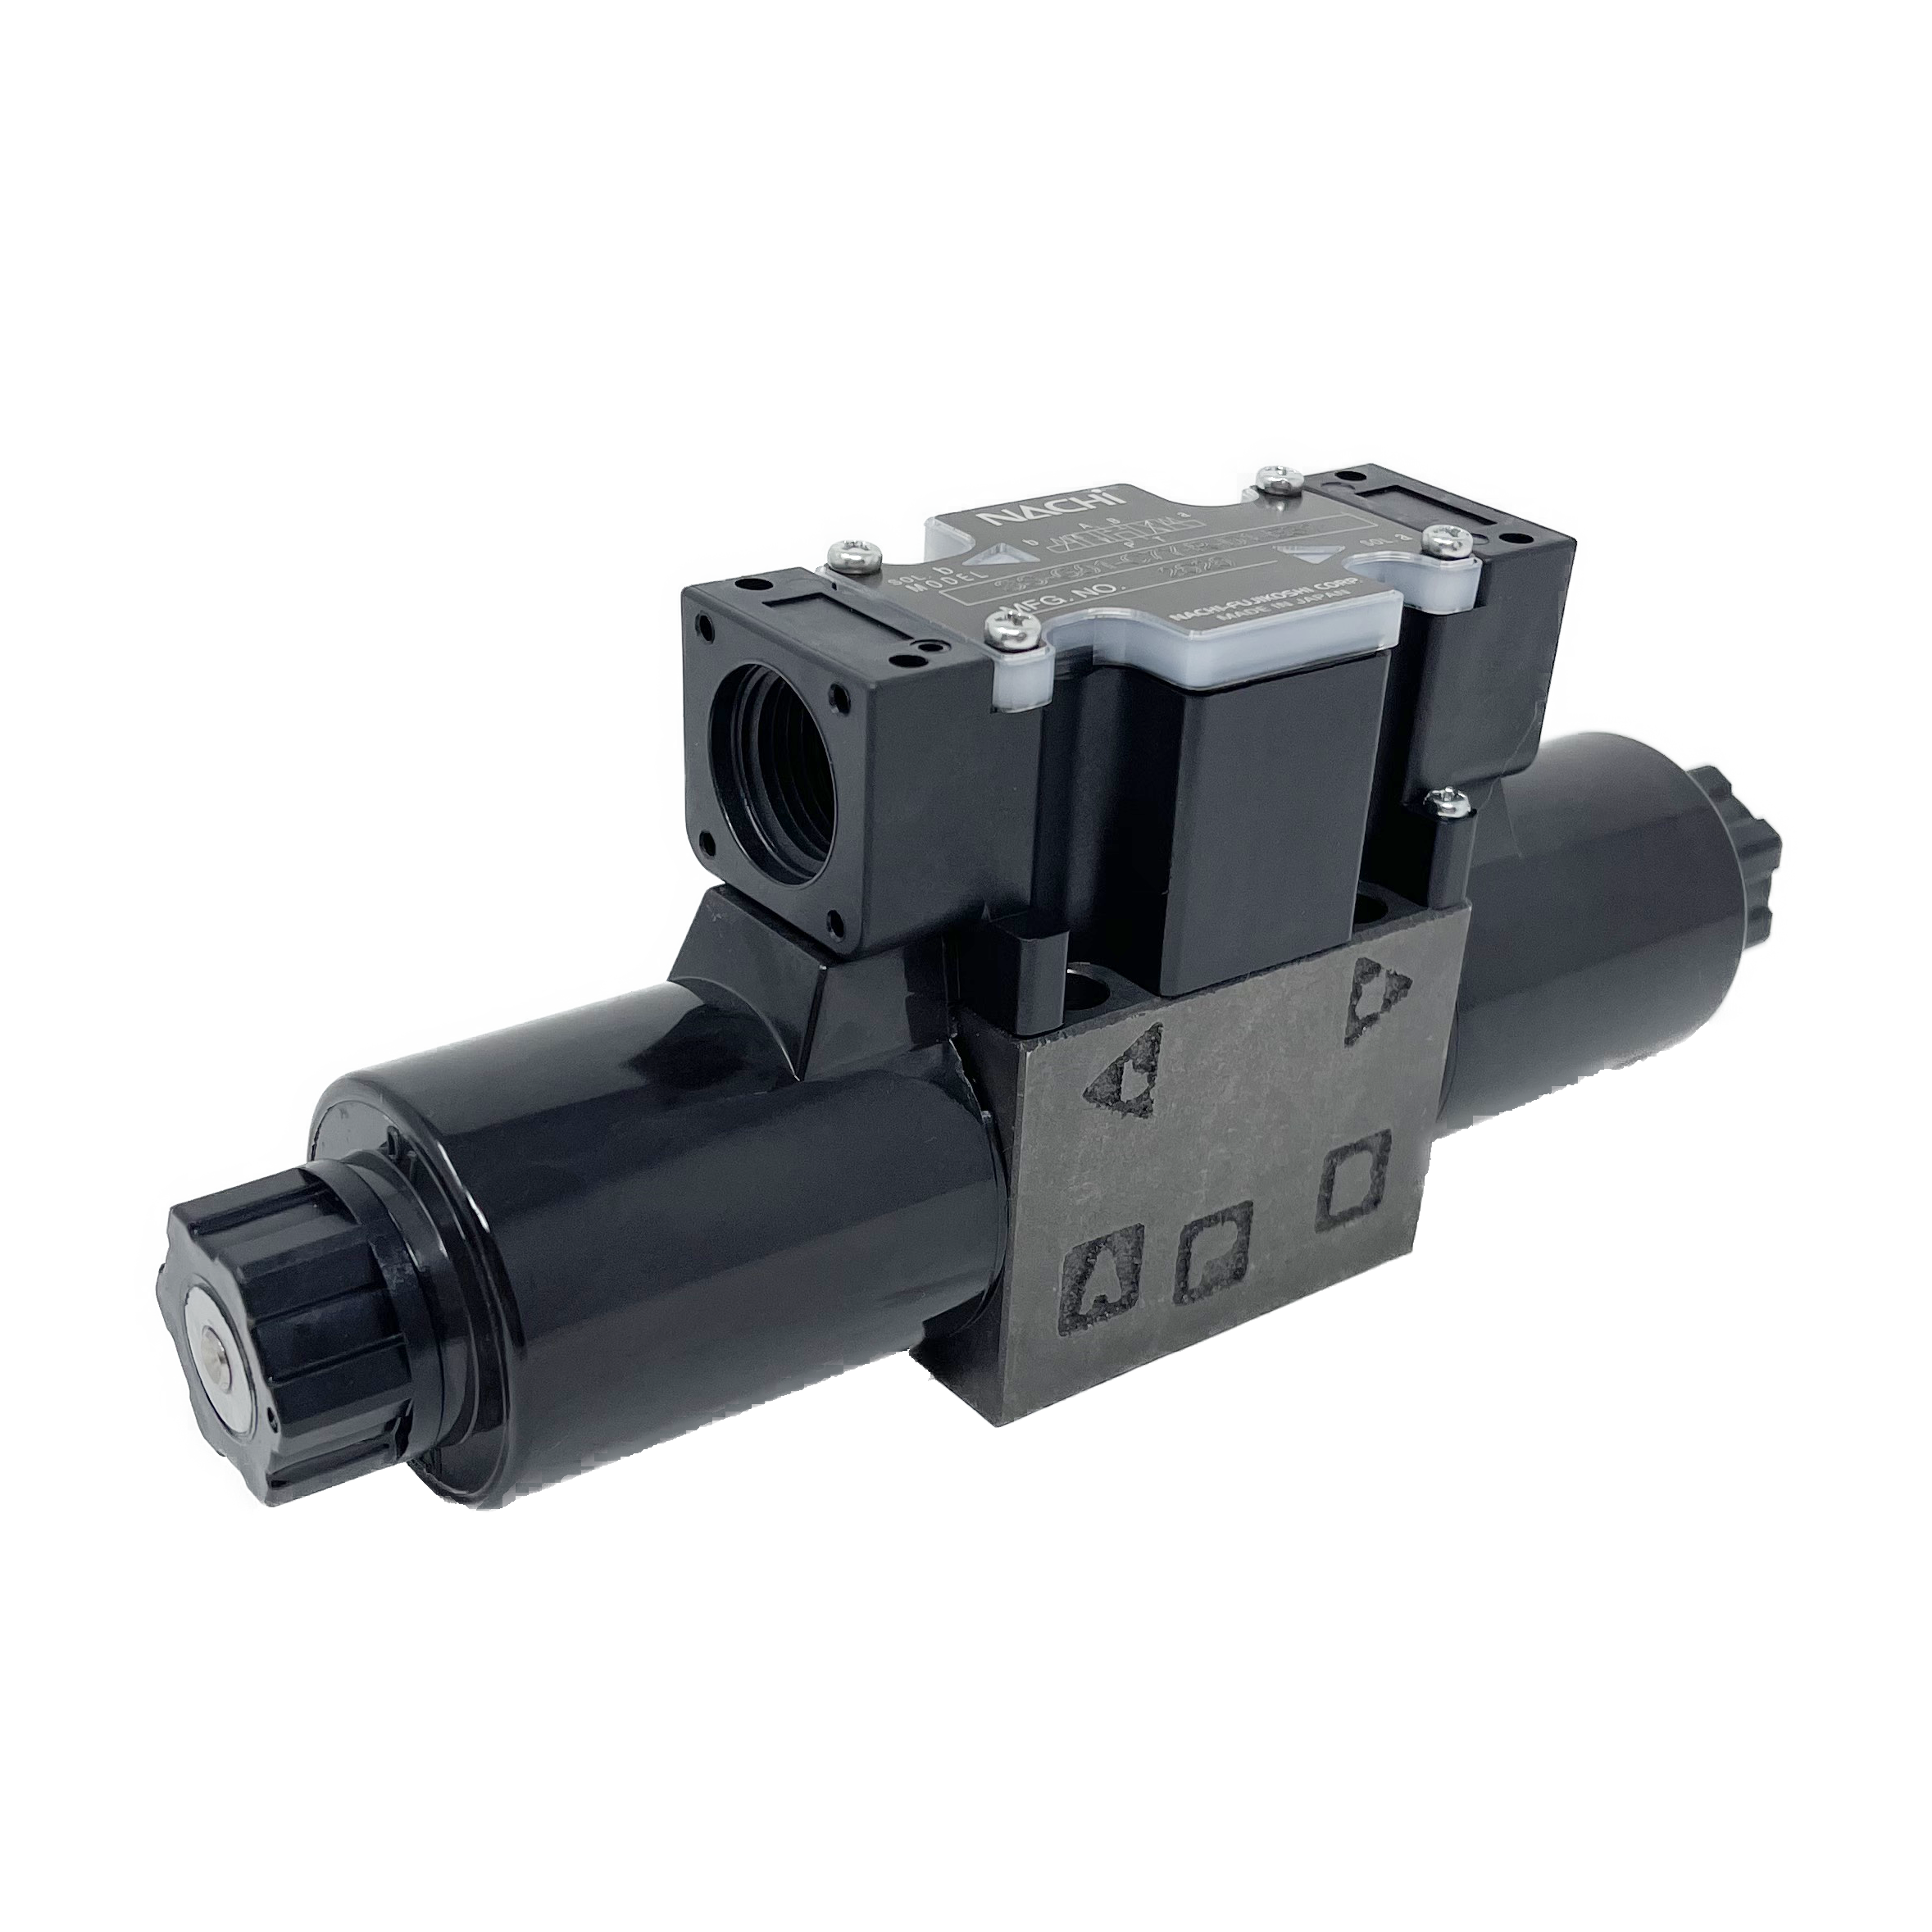 SS-G01-C5-R-D1-E31 : Nachi Solenoid Valve, 3P4W, D03 (NG6), 26.4GPM, 5075psi, All Ports Blocked Neutral, 12 VDC, Wiring Box with Lights